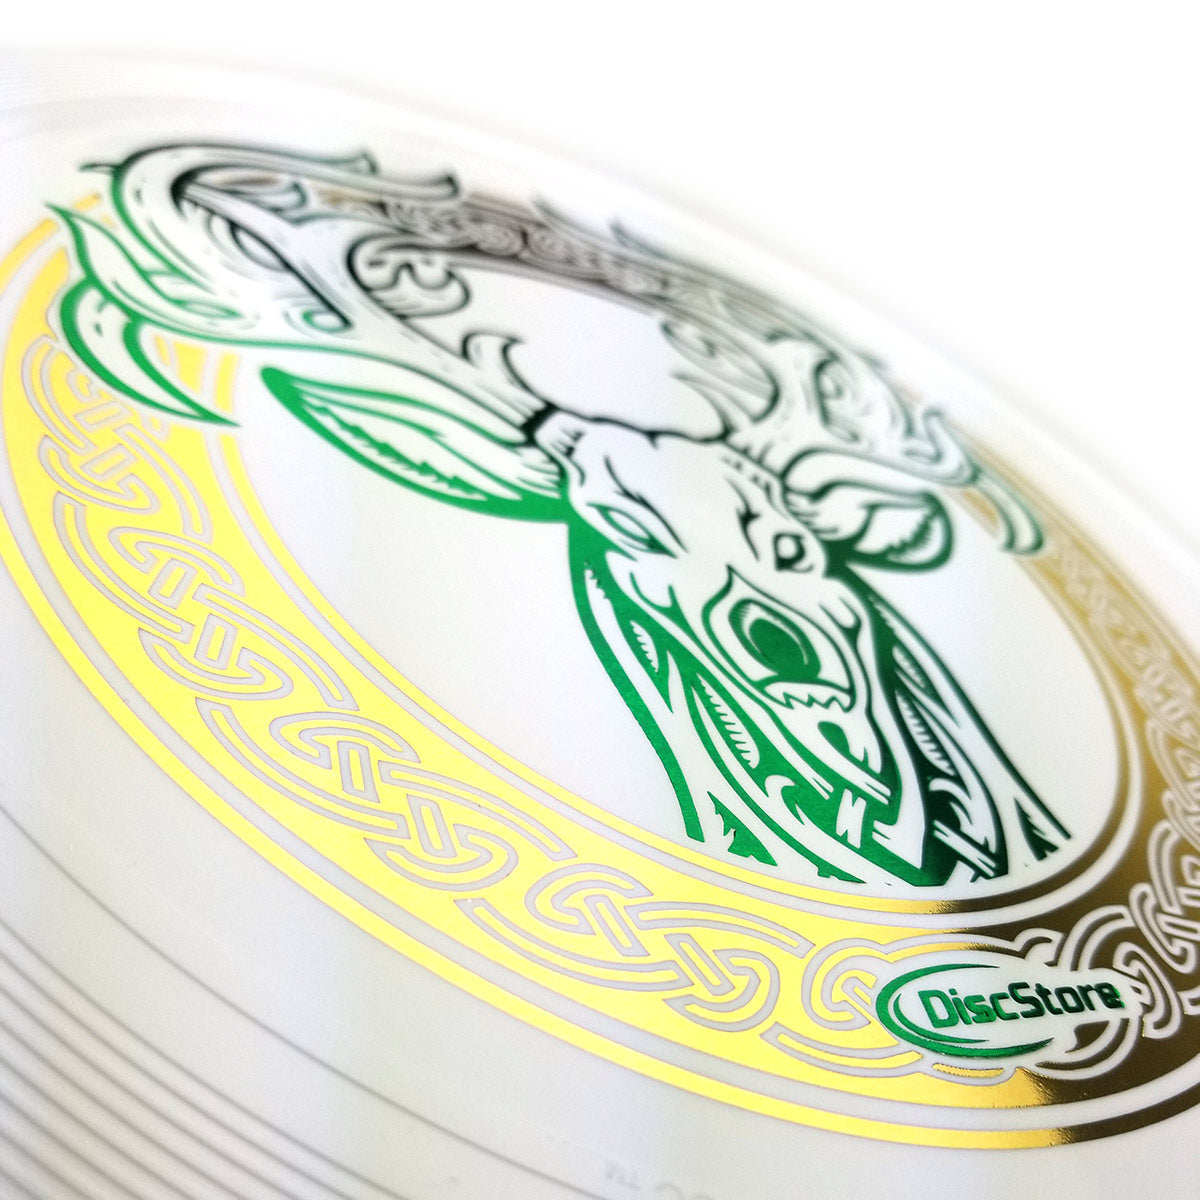 Celtic Stag Discraft Ultra-Star